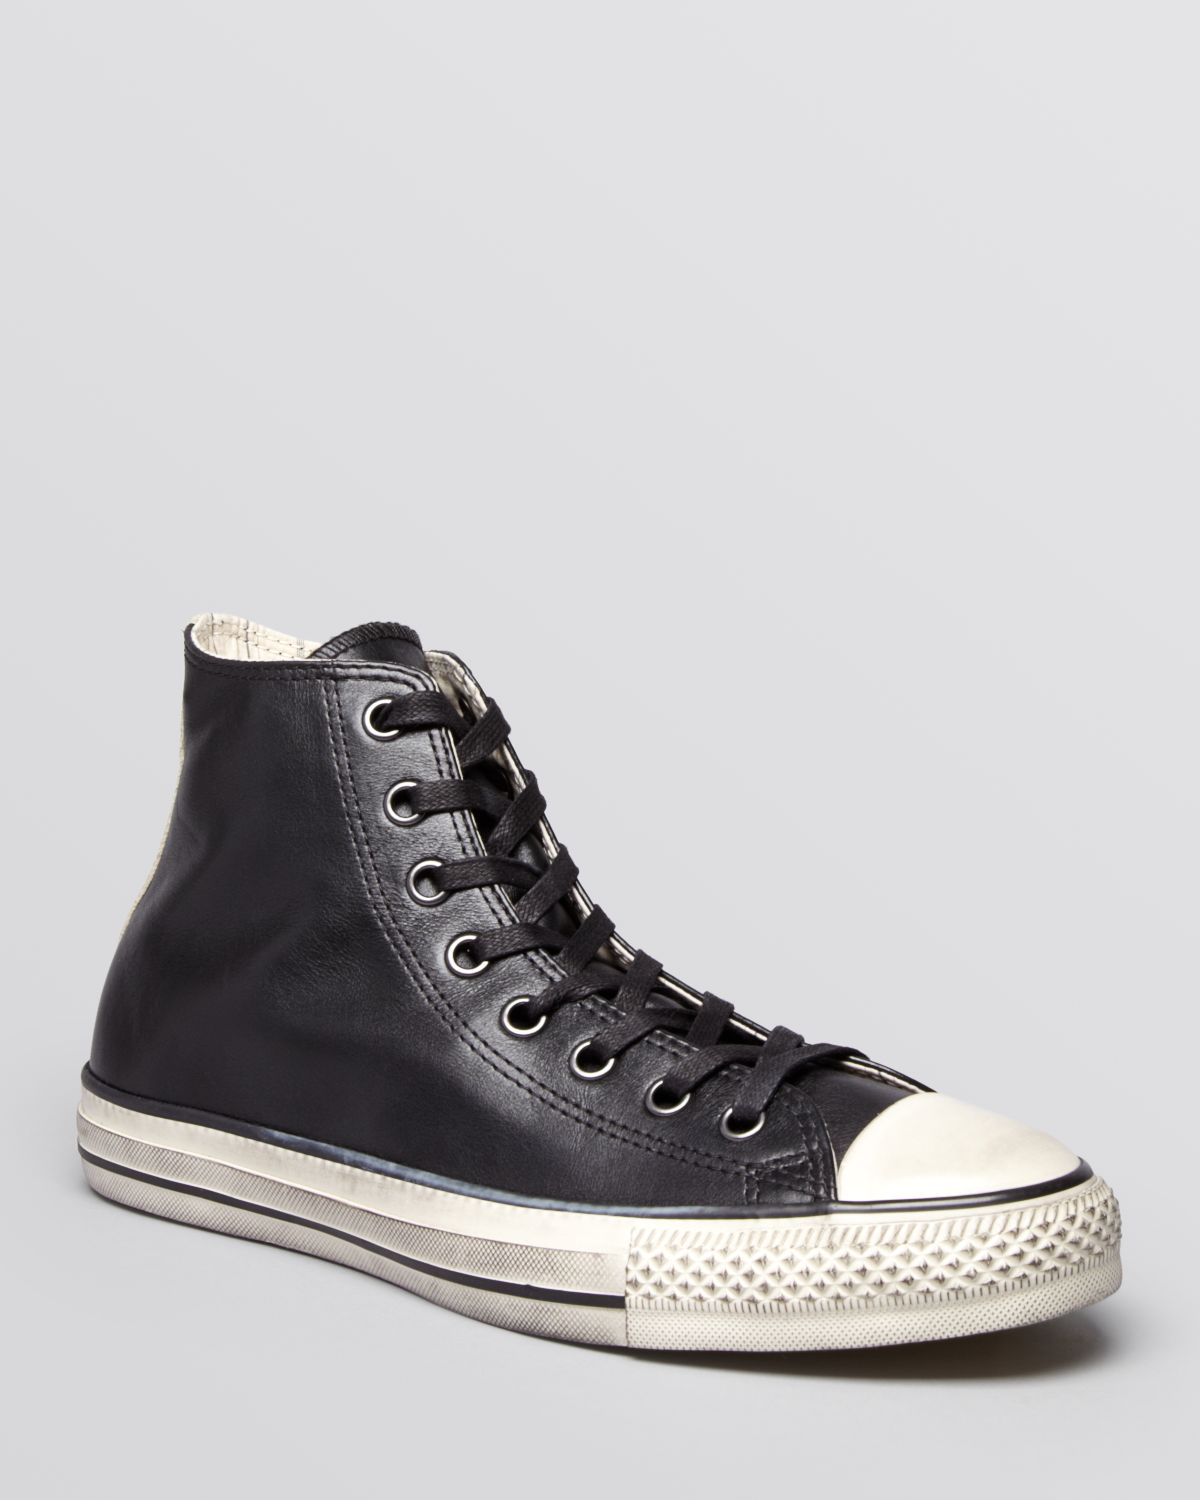 converse by john varvatos chuck taylor all star burnished canvas